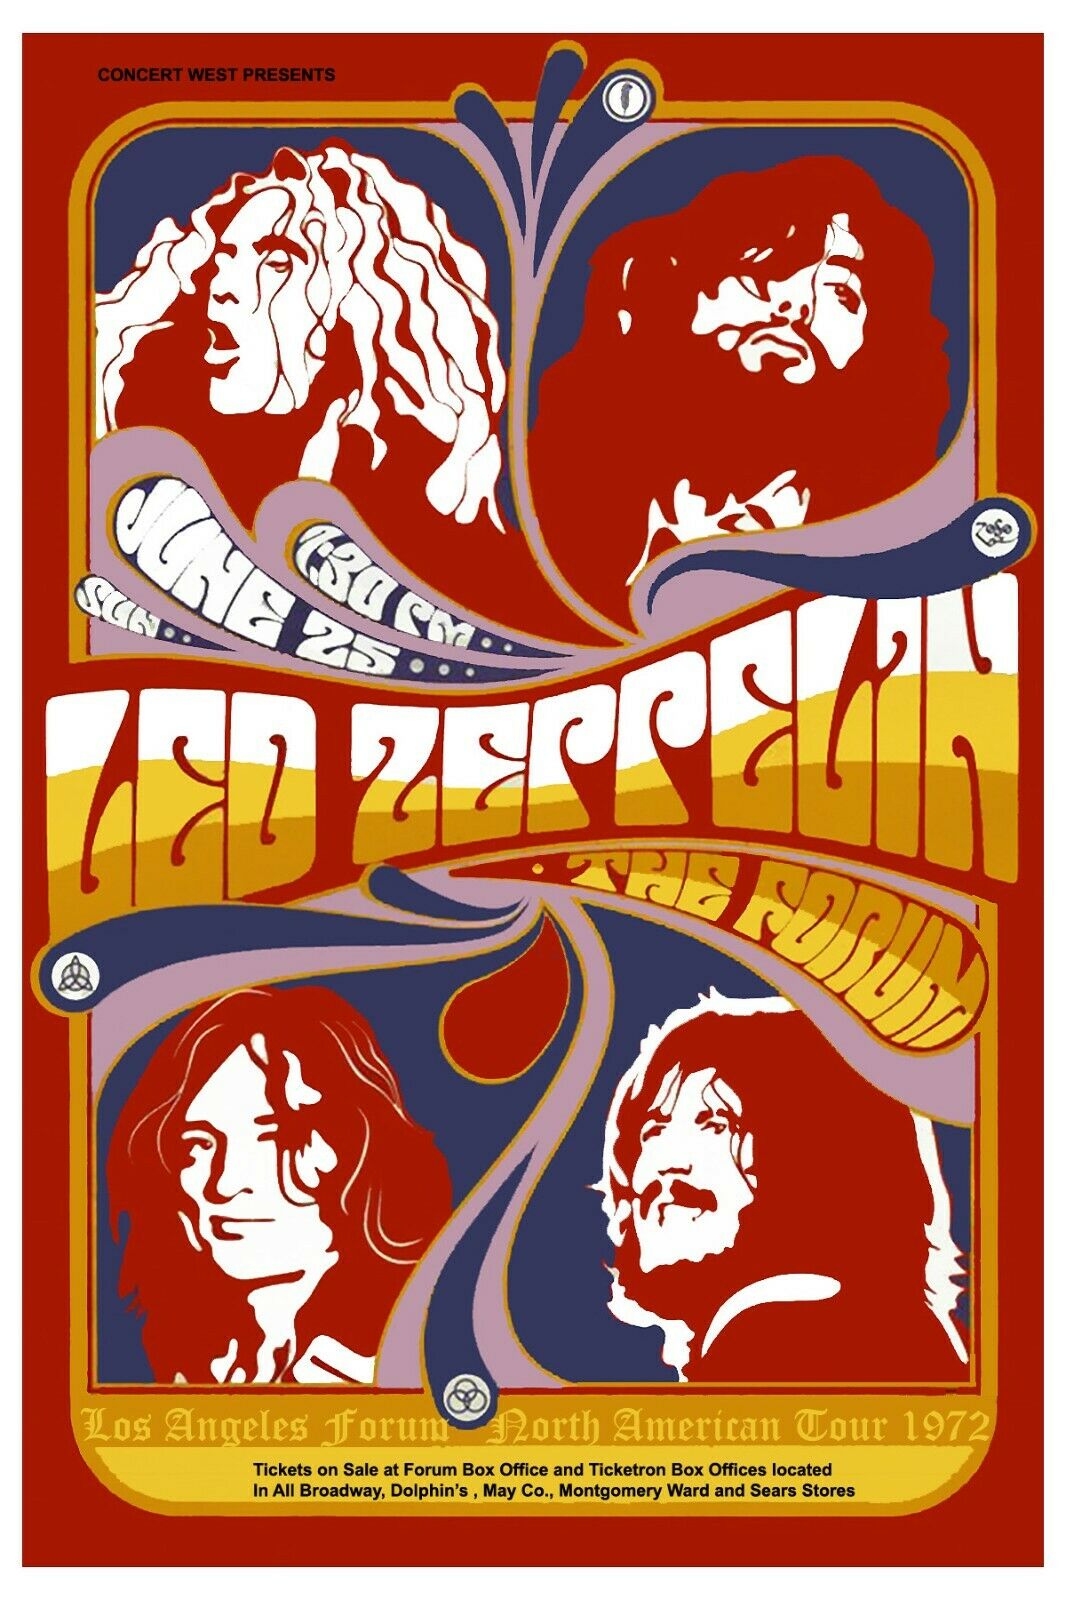 Led Zeppelin At The Forum In Ingelwood California Concert Poster 1972   12x18